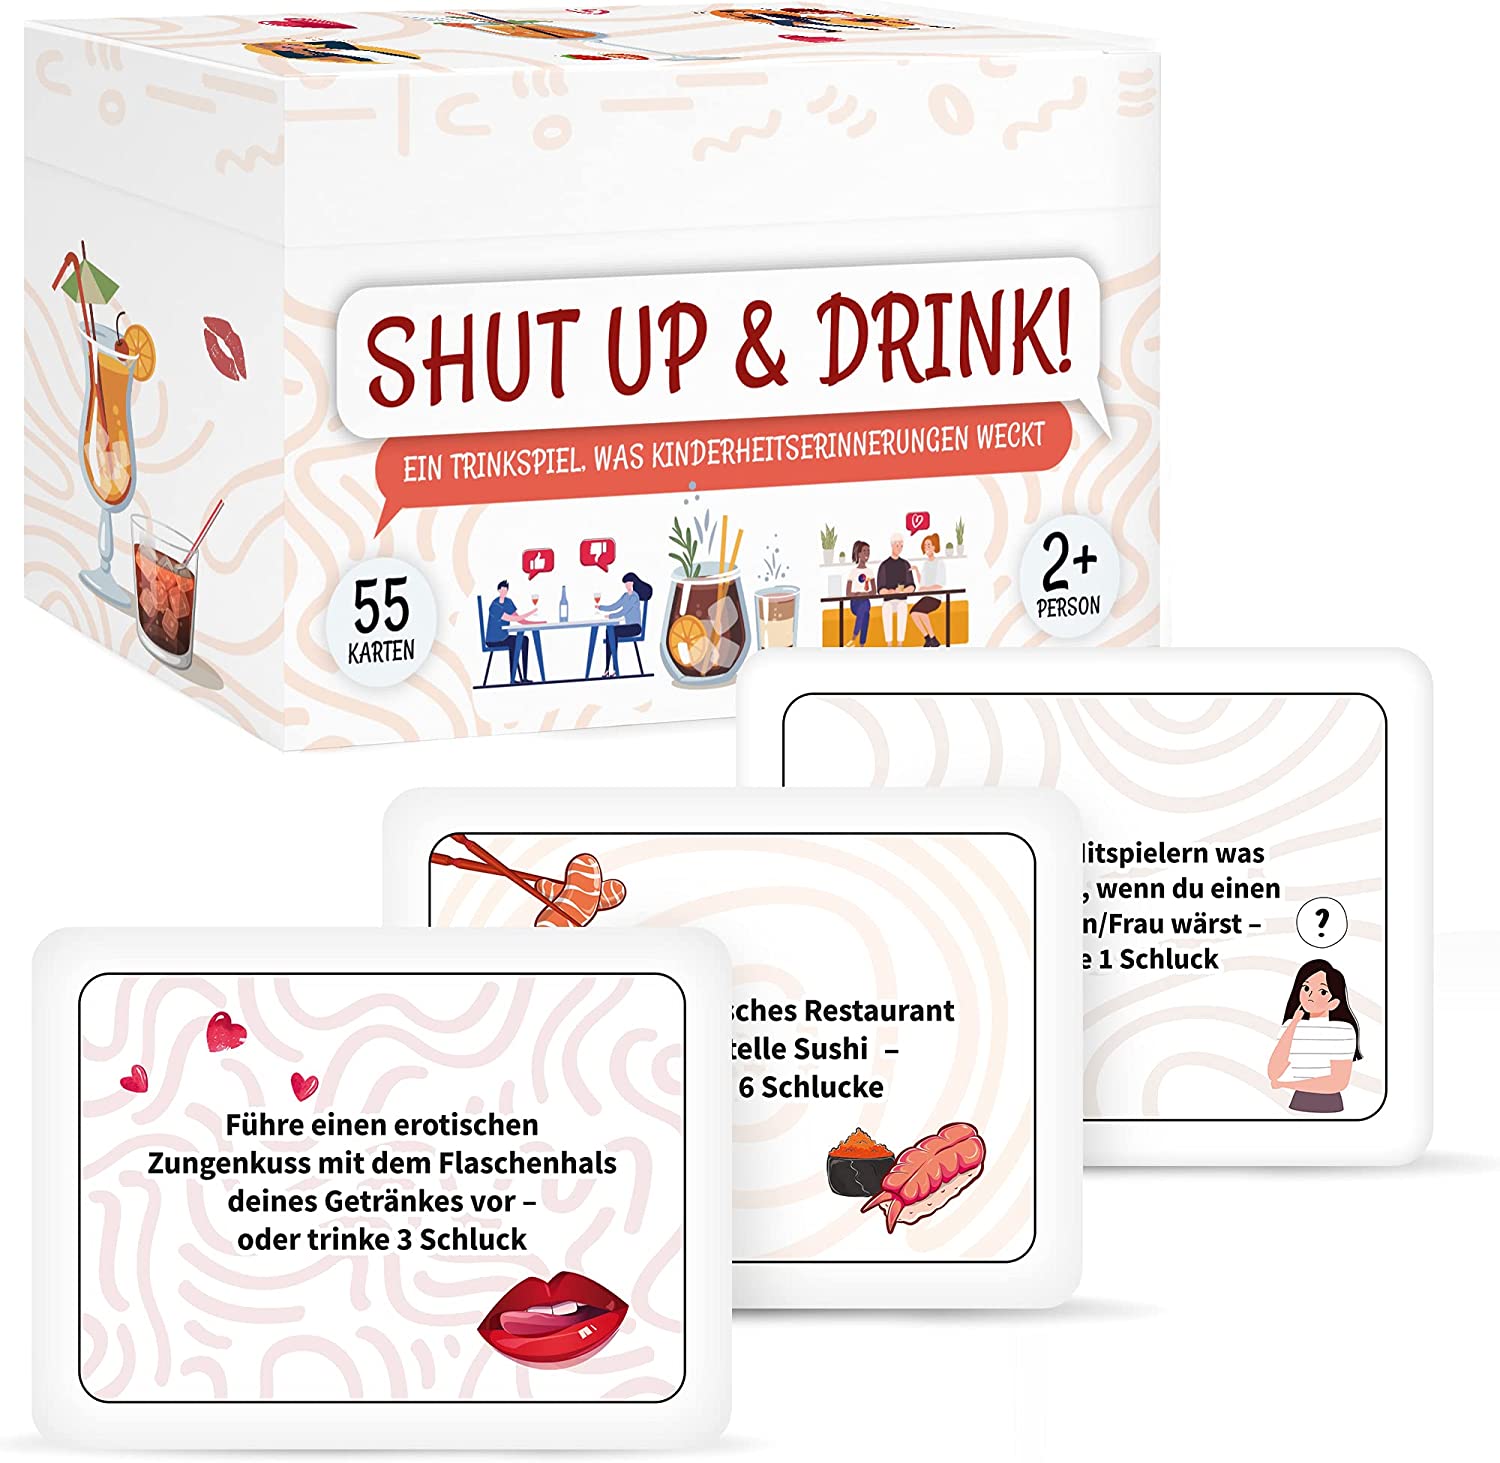 Shut up and drink